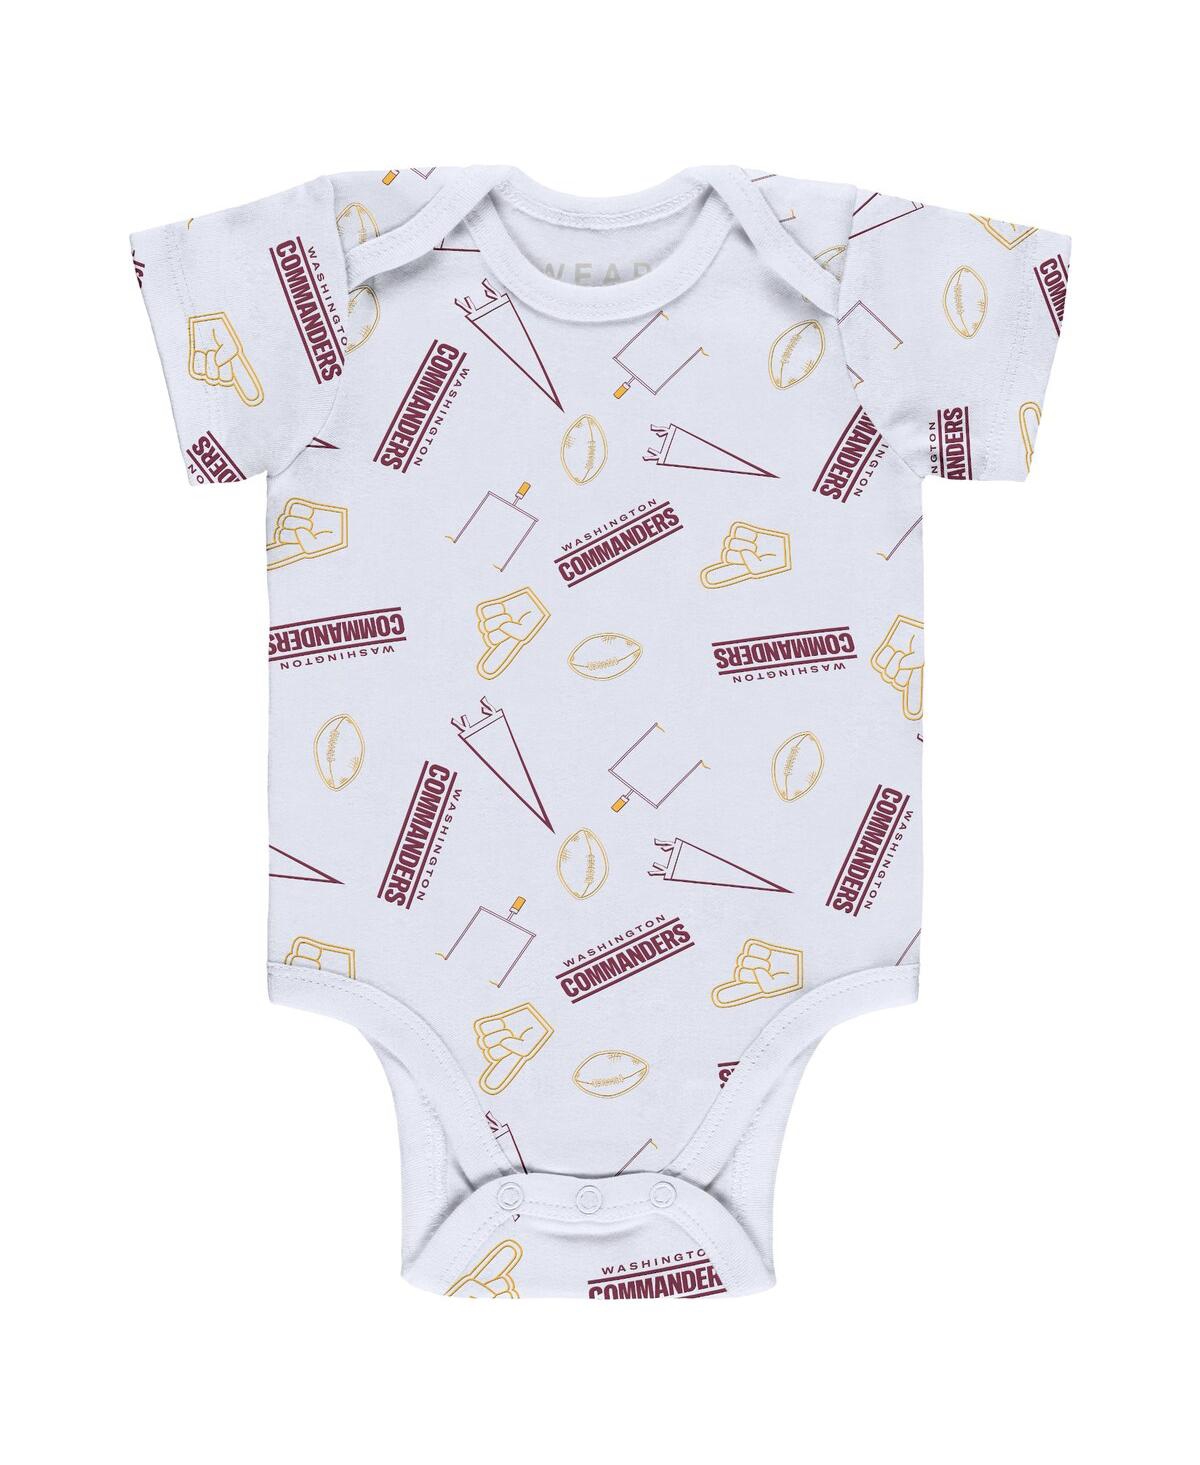 Shop Wear By Erin Andrews Newborn And Infant Boys And Girls  Gray, Burgundy, White Washington Commanders T In Gray,burgundy,white